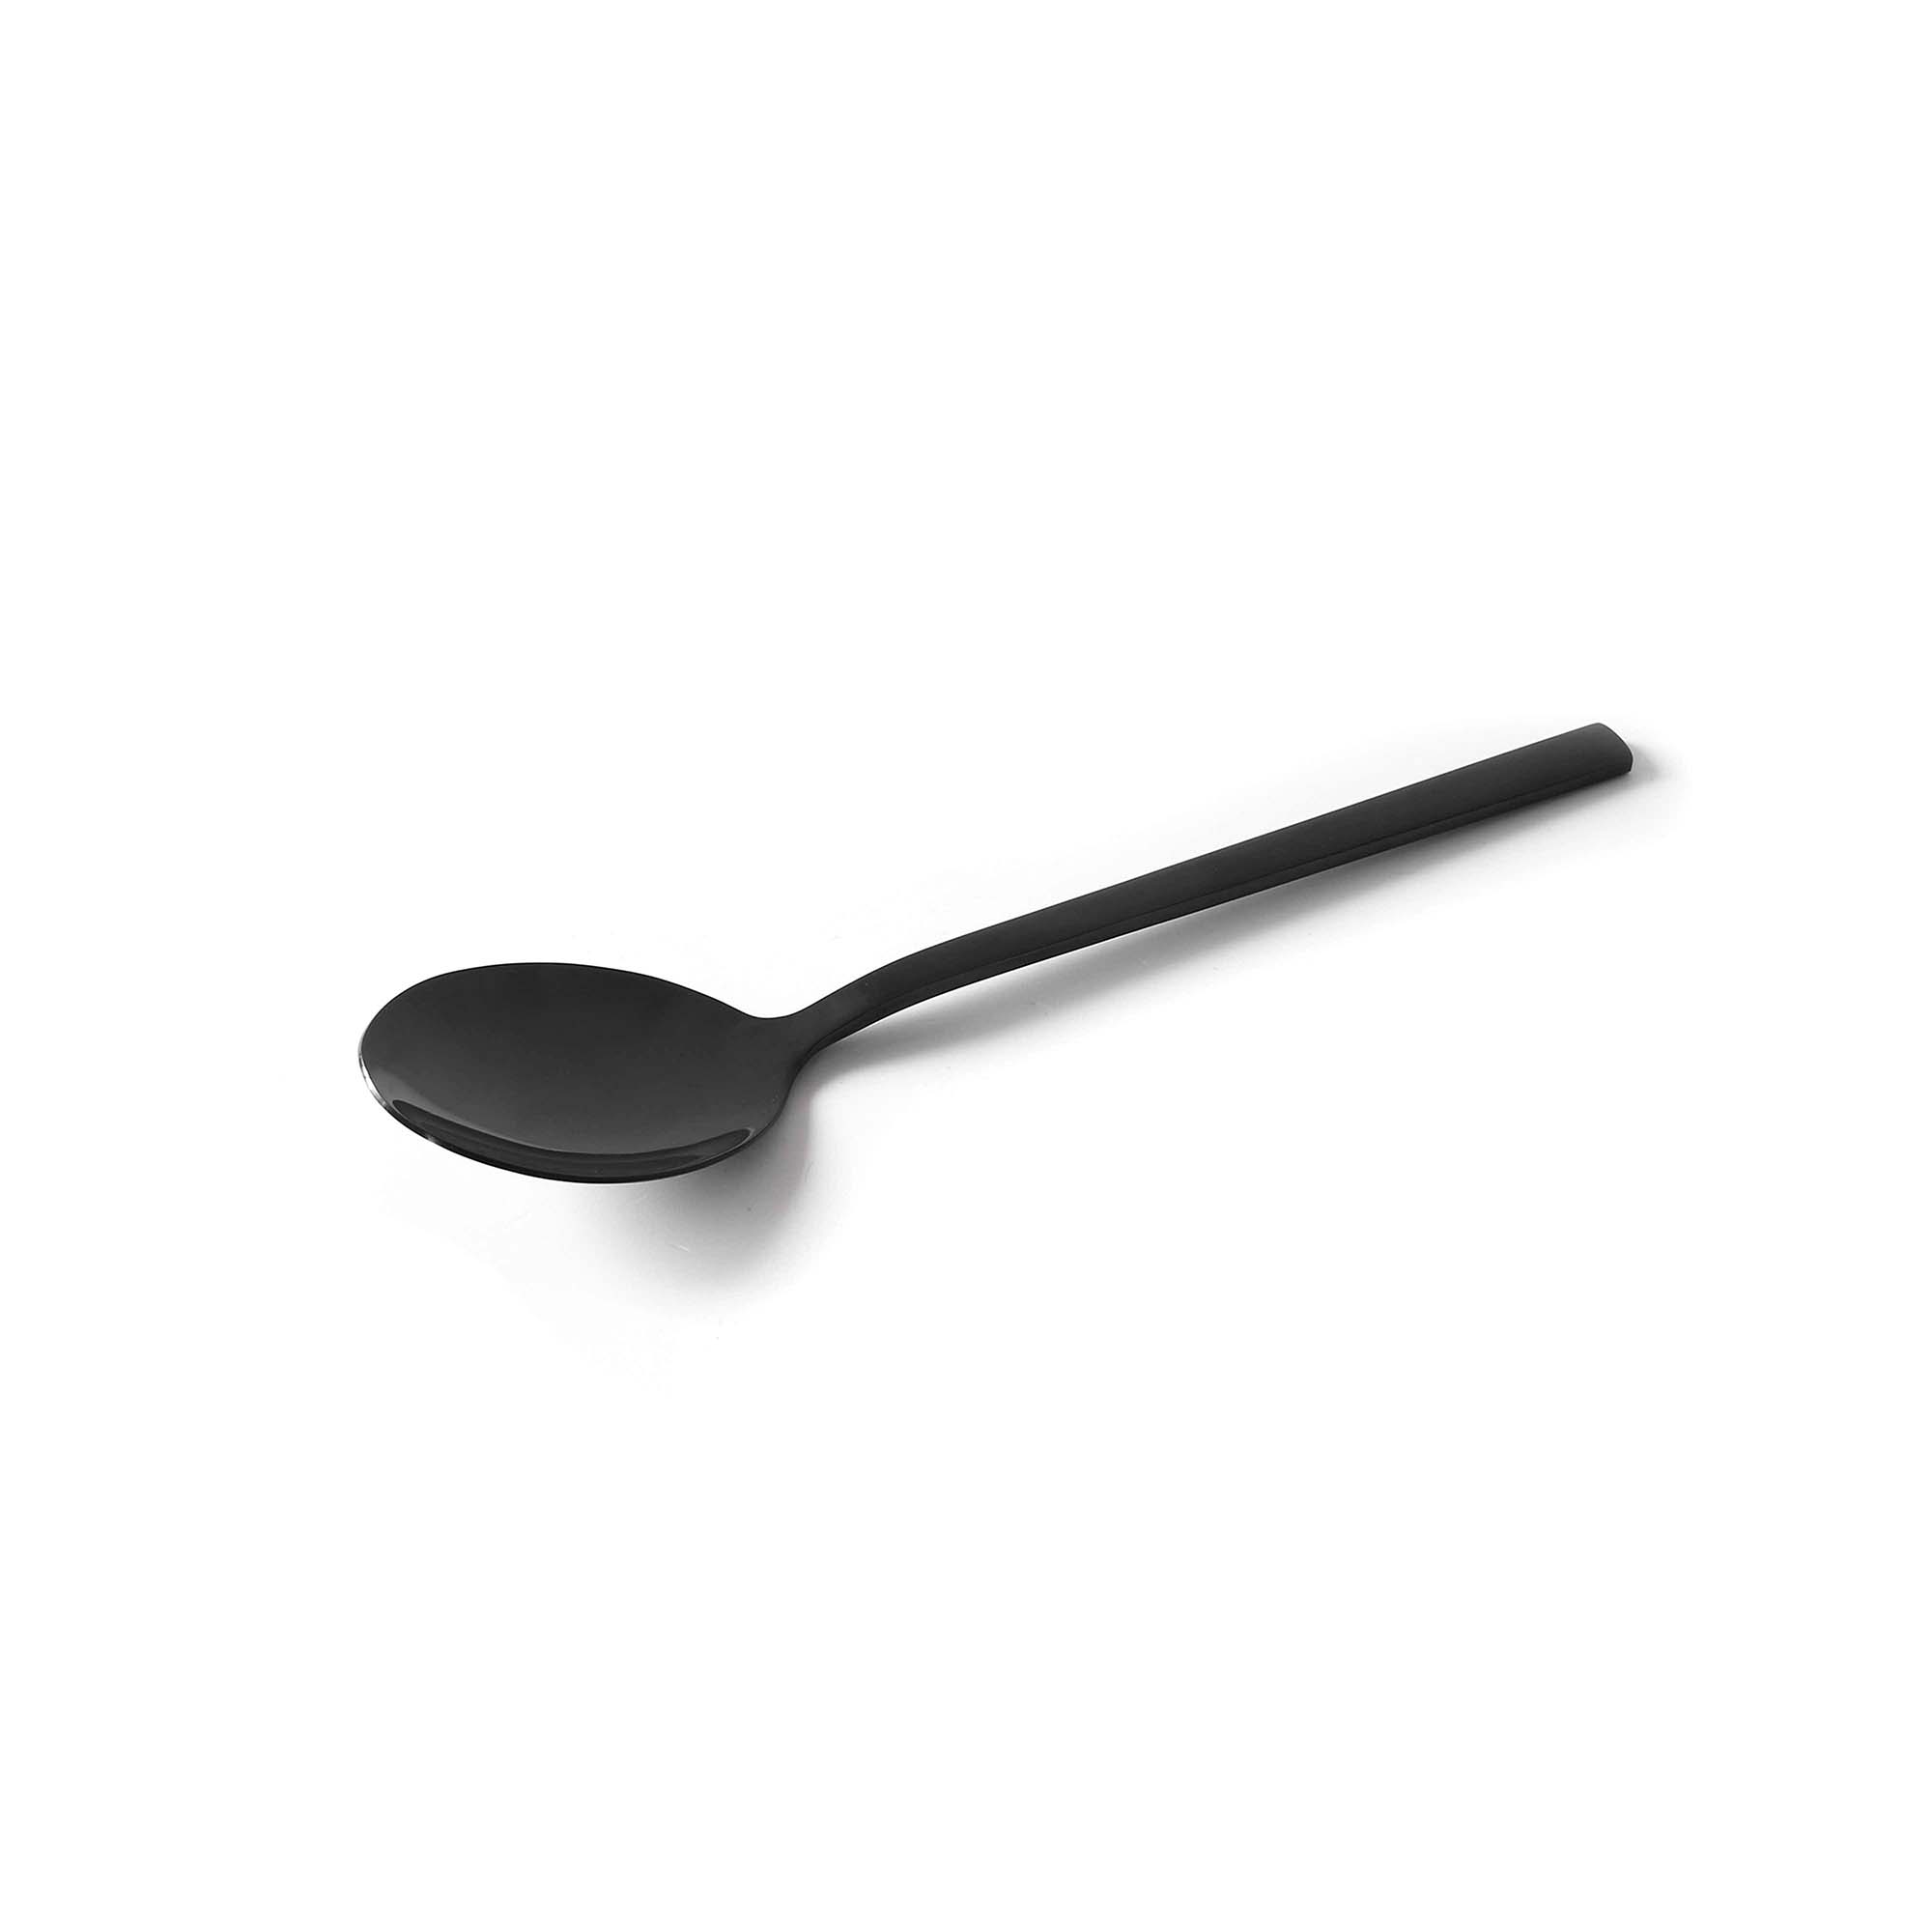 Charcoal dinner spoon